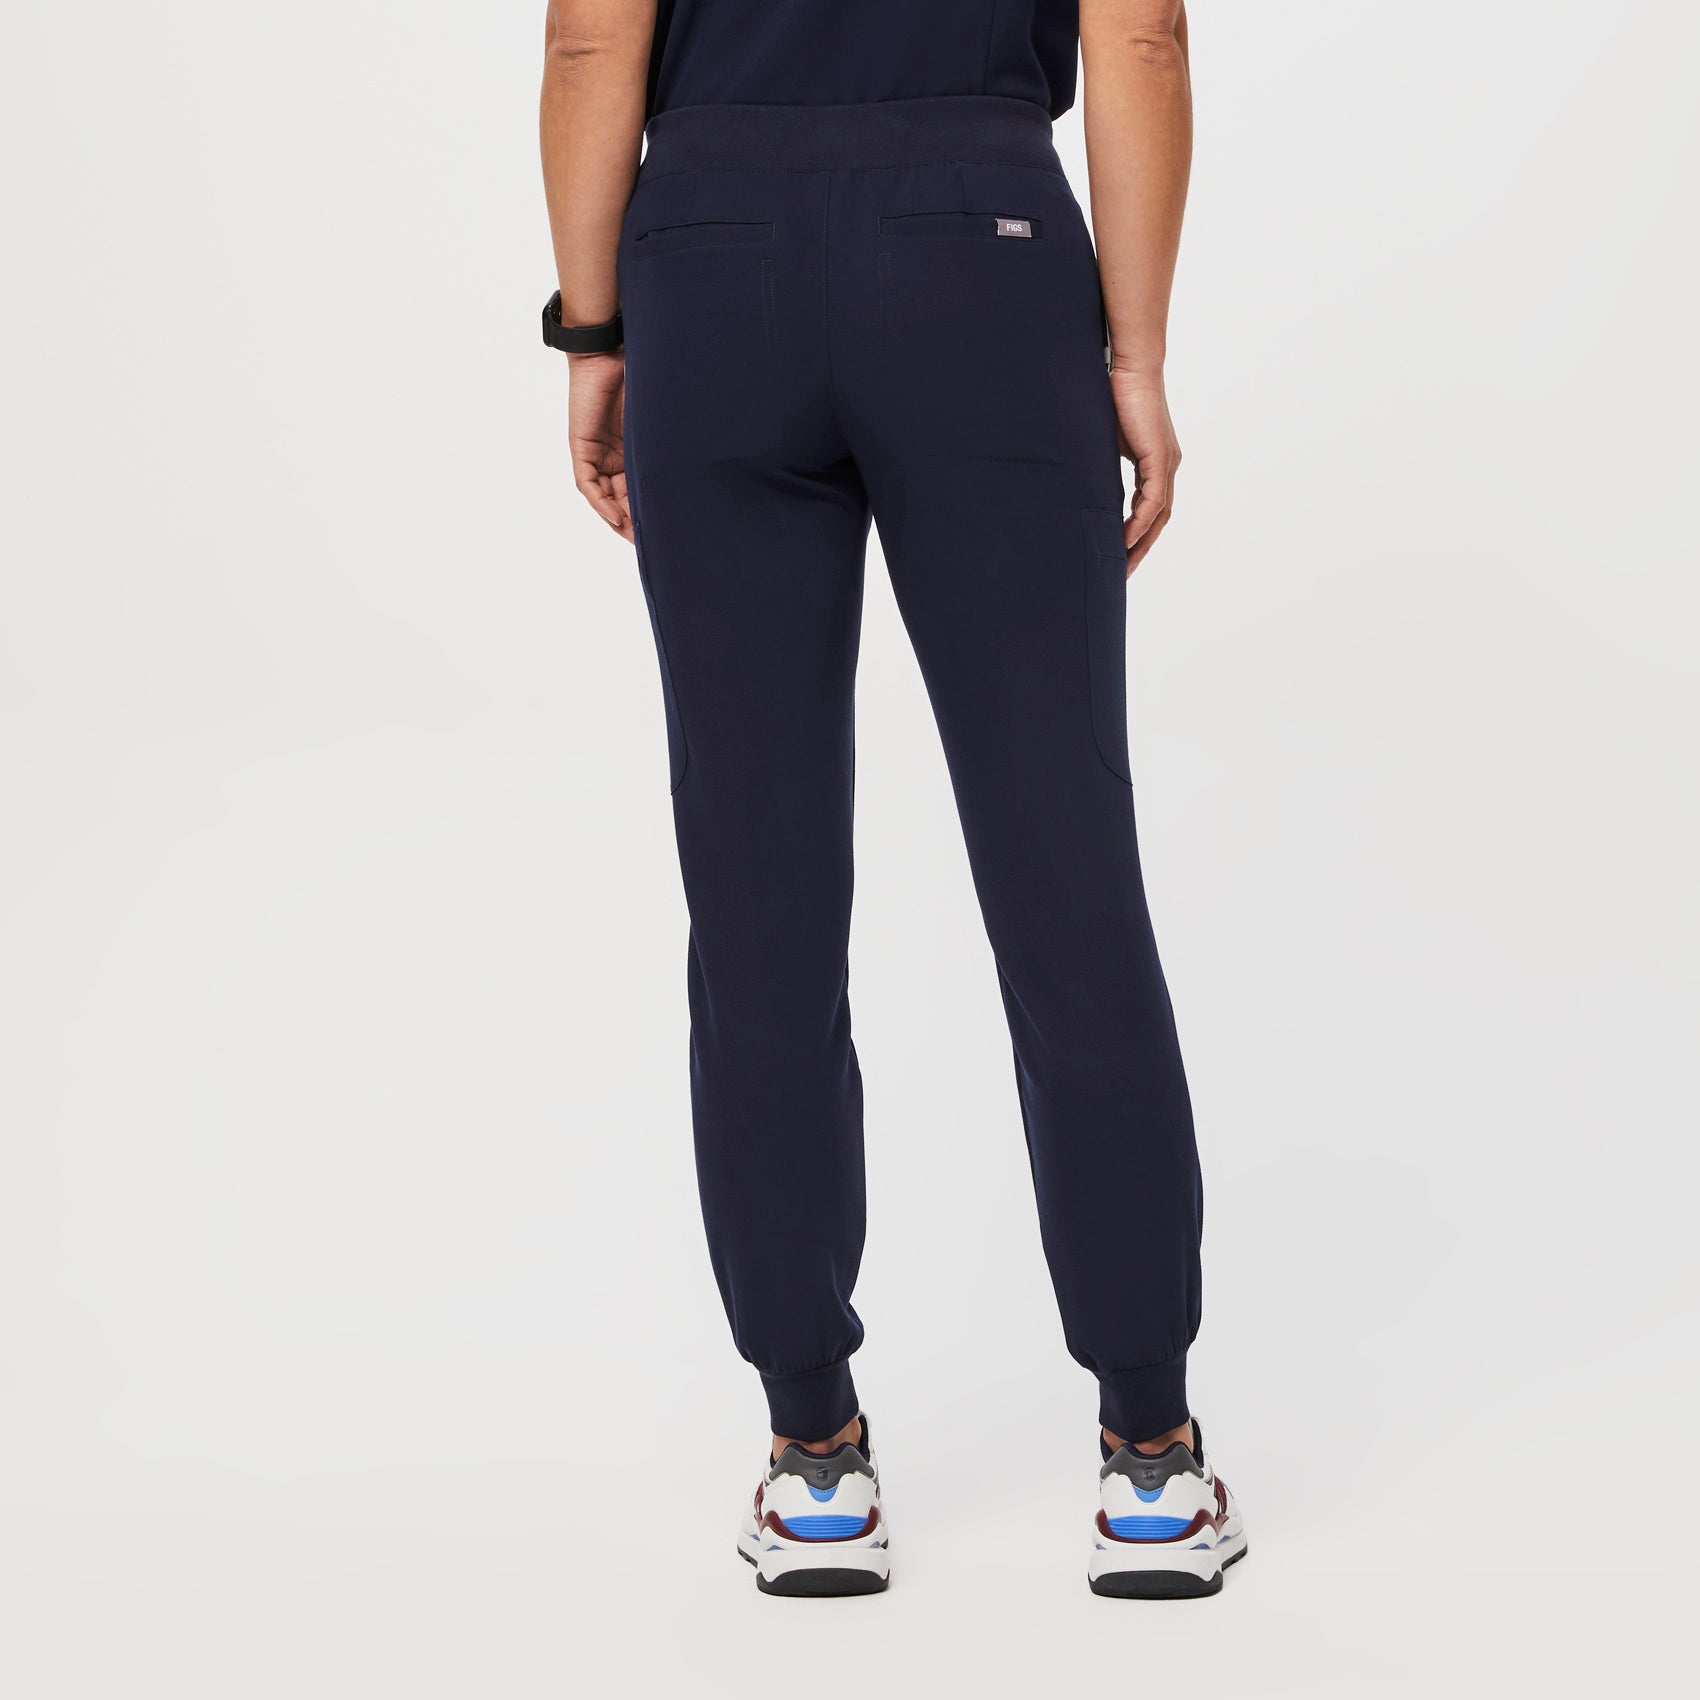 Women’s Muoy Jogger Scrub Pant - Navy · FIGS